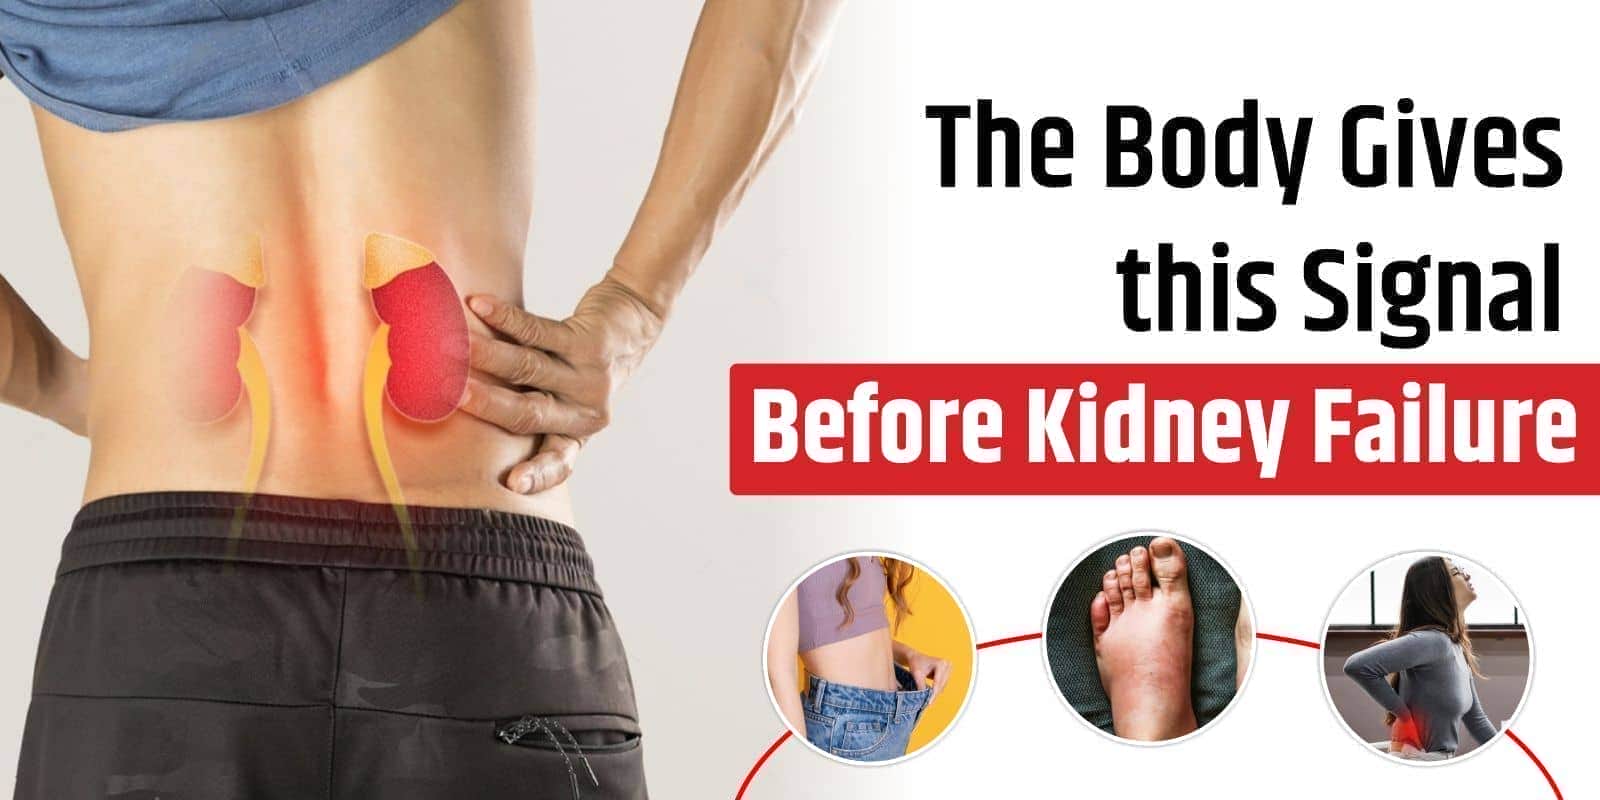 The Body Gives this Signal Before Kidney Failure